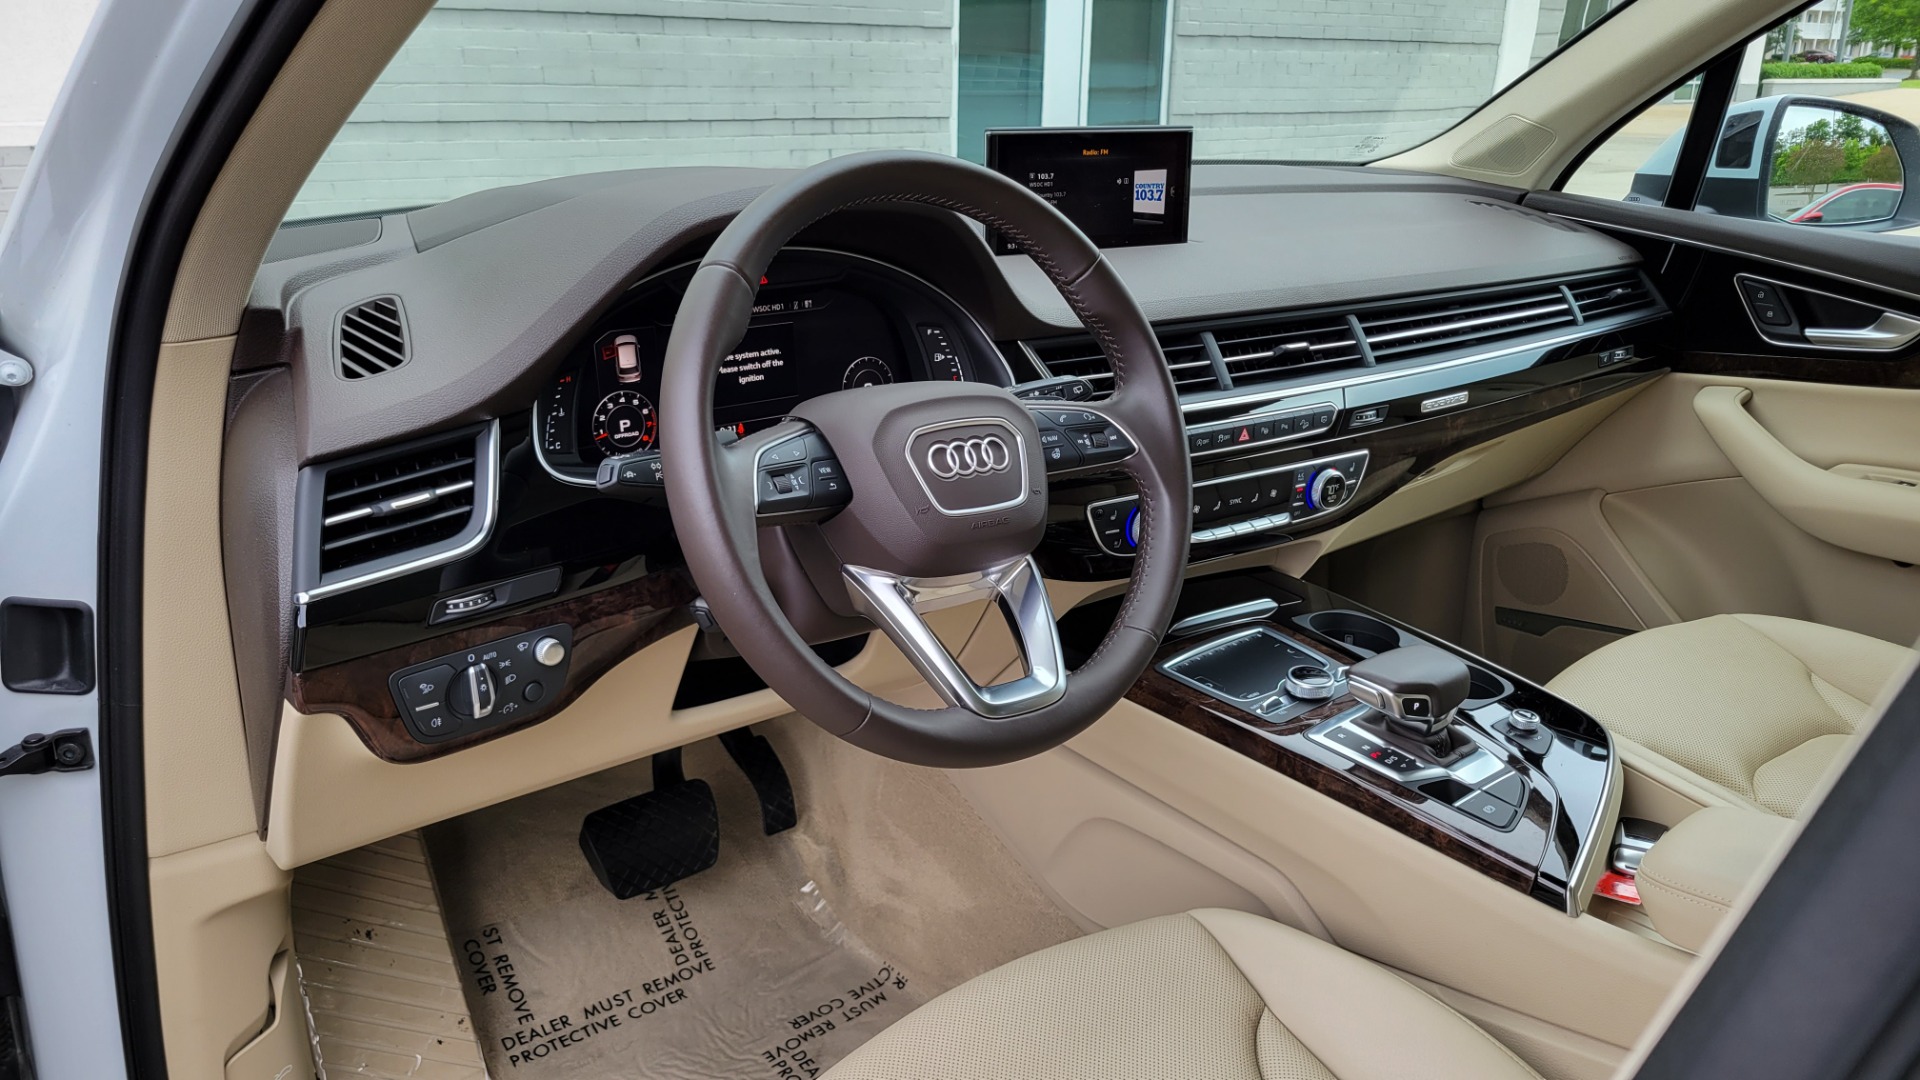 Used 2019 Audi Q7 PRESTIGE / CONV PKG / BOSE / HUD / CLD WTHR / TOWING / REARVIEW for sale $51,995 at Formula Imports in Charlotte NC 28227 46